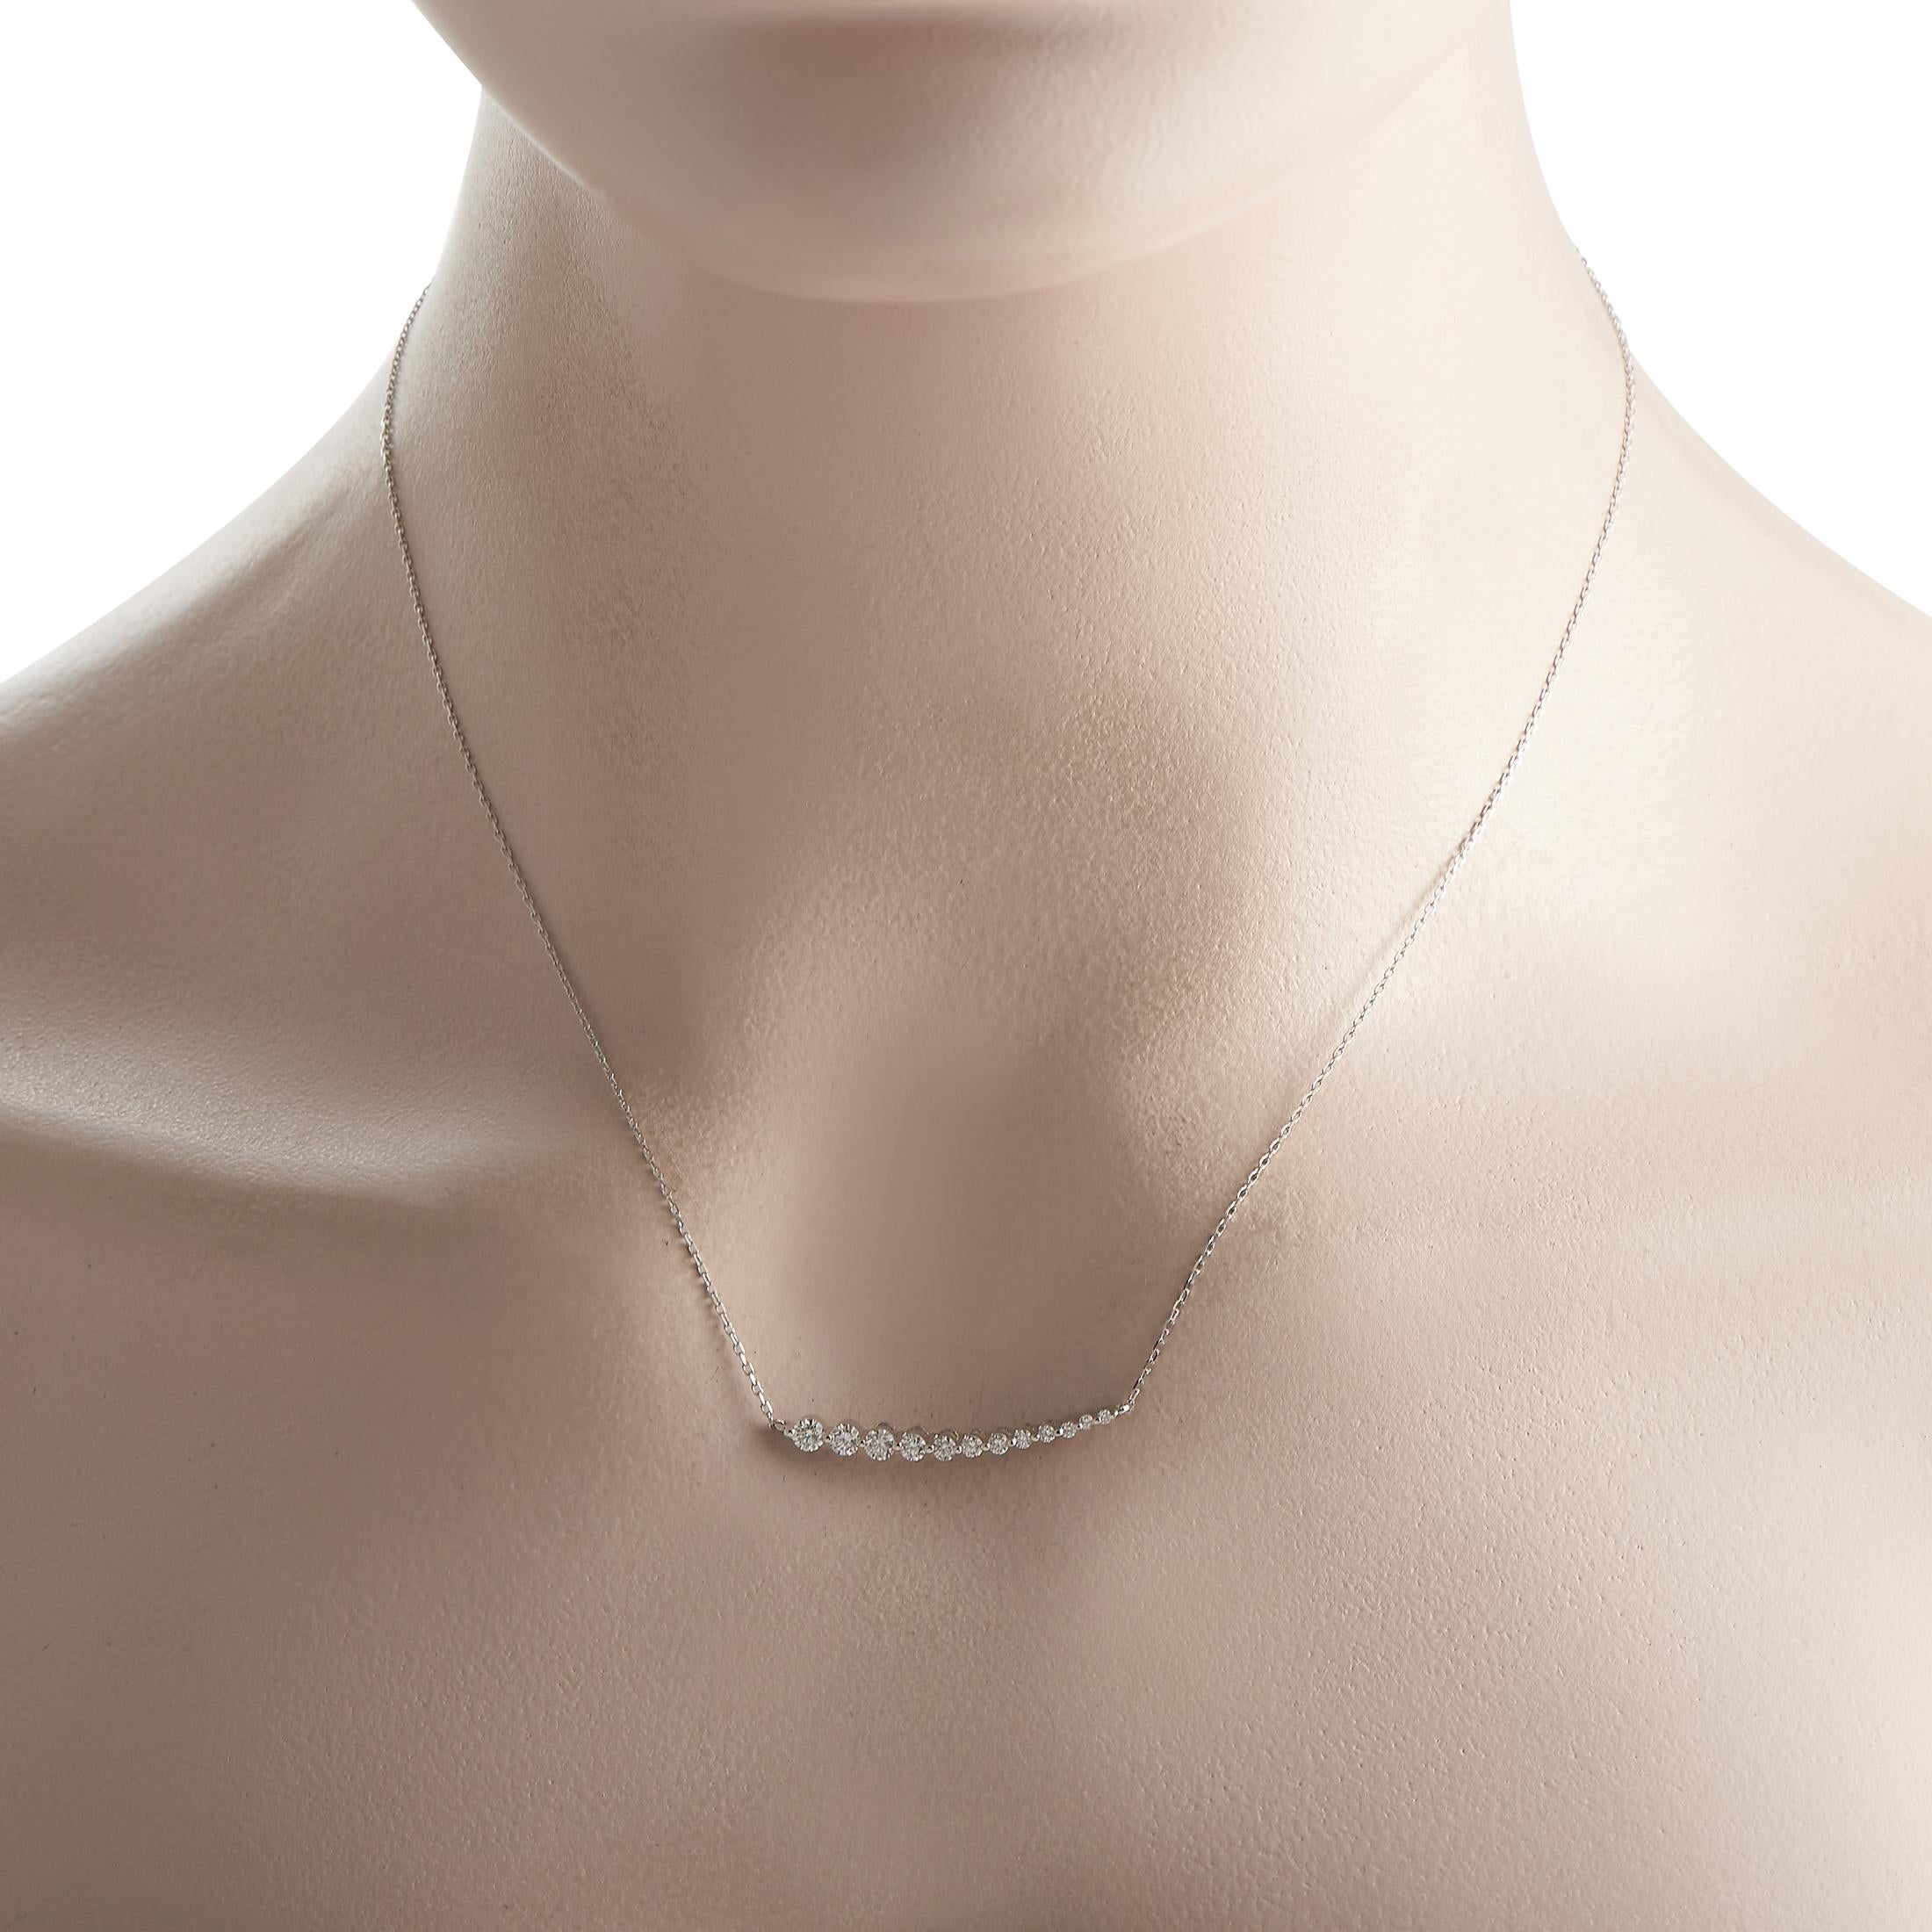 The perfect day-to-night diamond jewelry. This 14K white gold necklace has a delicate cable chain with a lobster clasp. It shimmers with a subtly curved row of tapering diamonds on shared prongs.This brand new LB Exclusive 14K White Gold 0.50ct